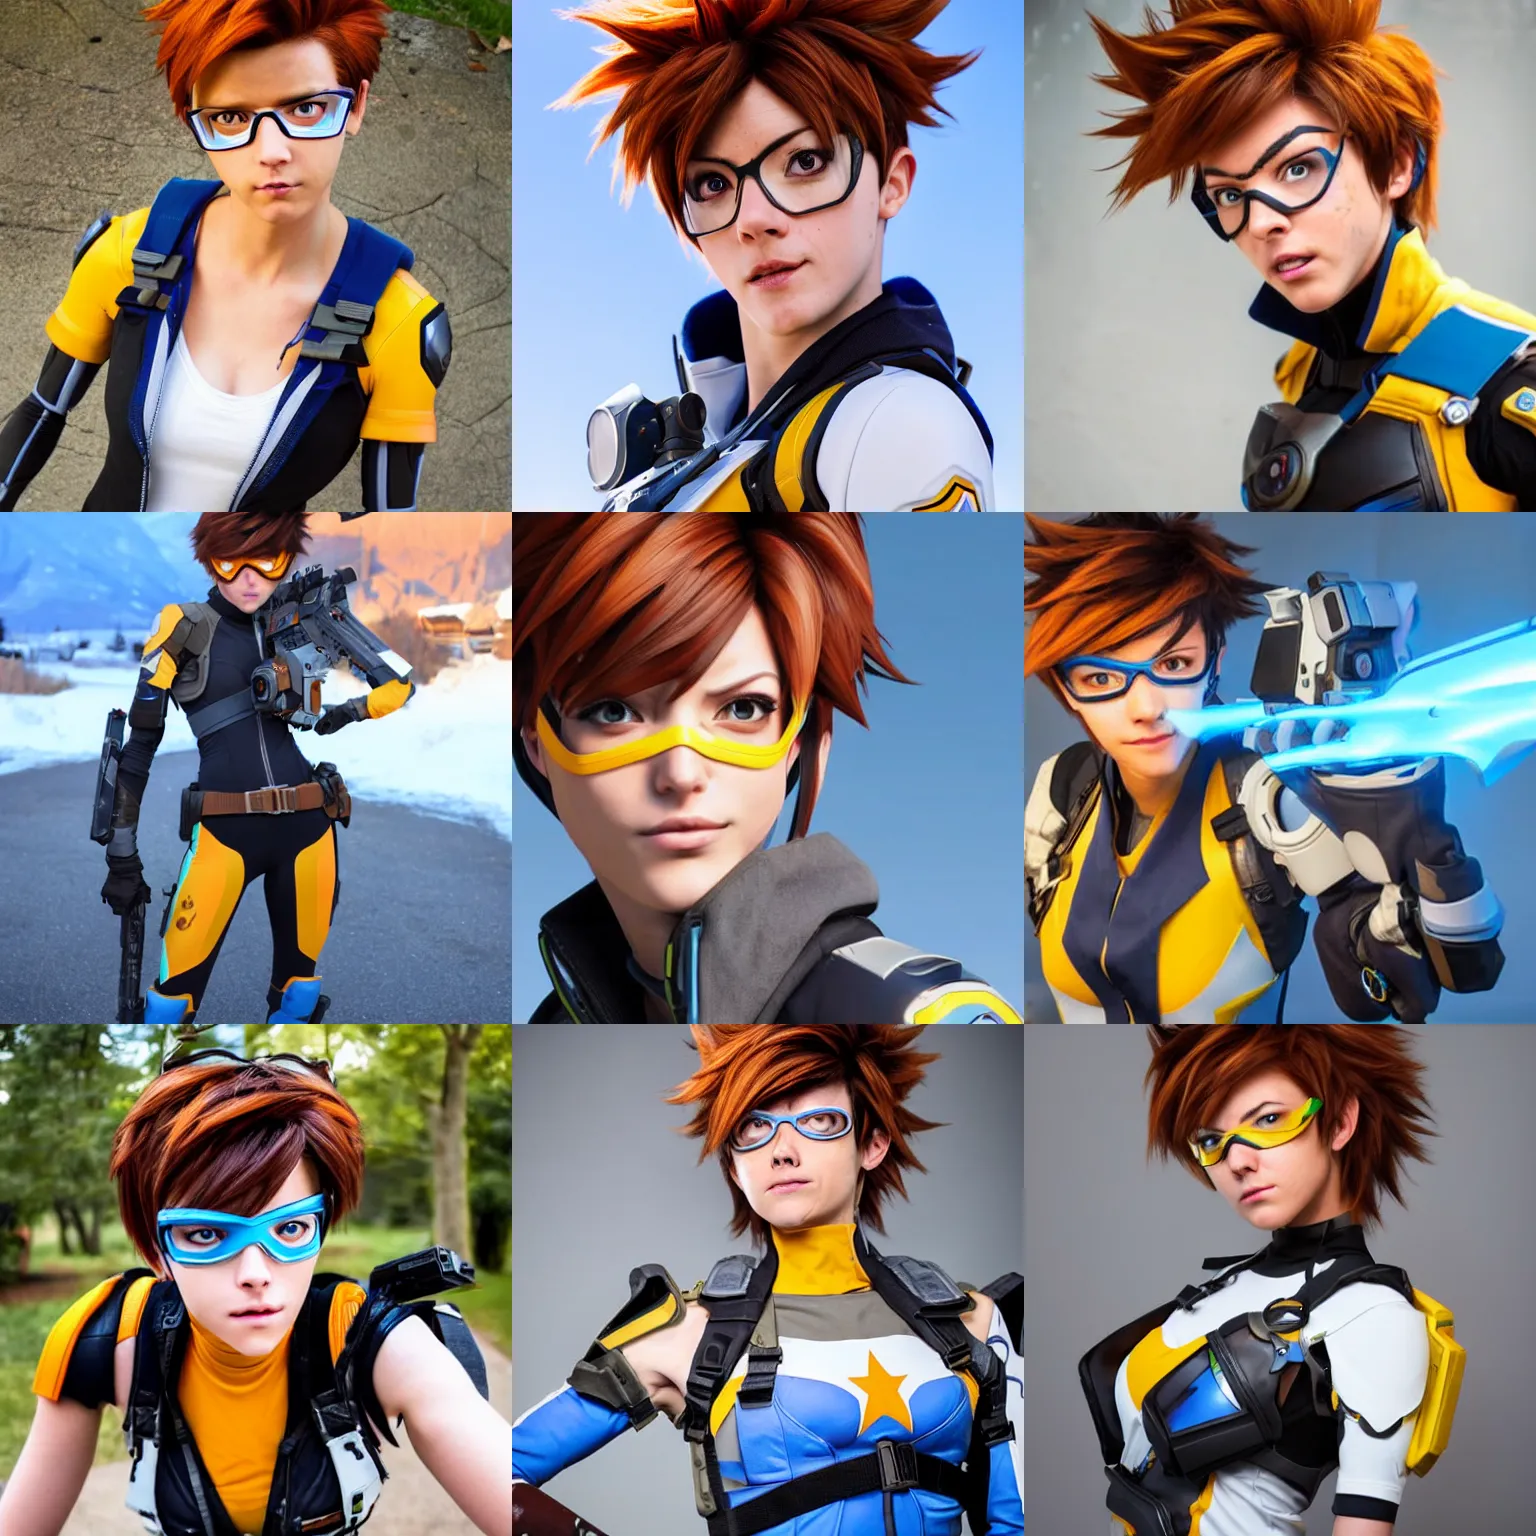 Fanart of Tracer, from Overwatch that my friend made. - Creativity post -  Imgur